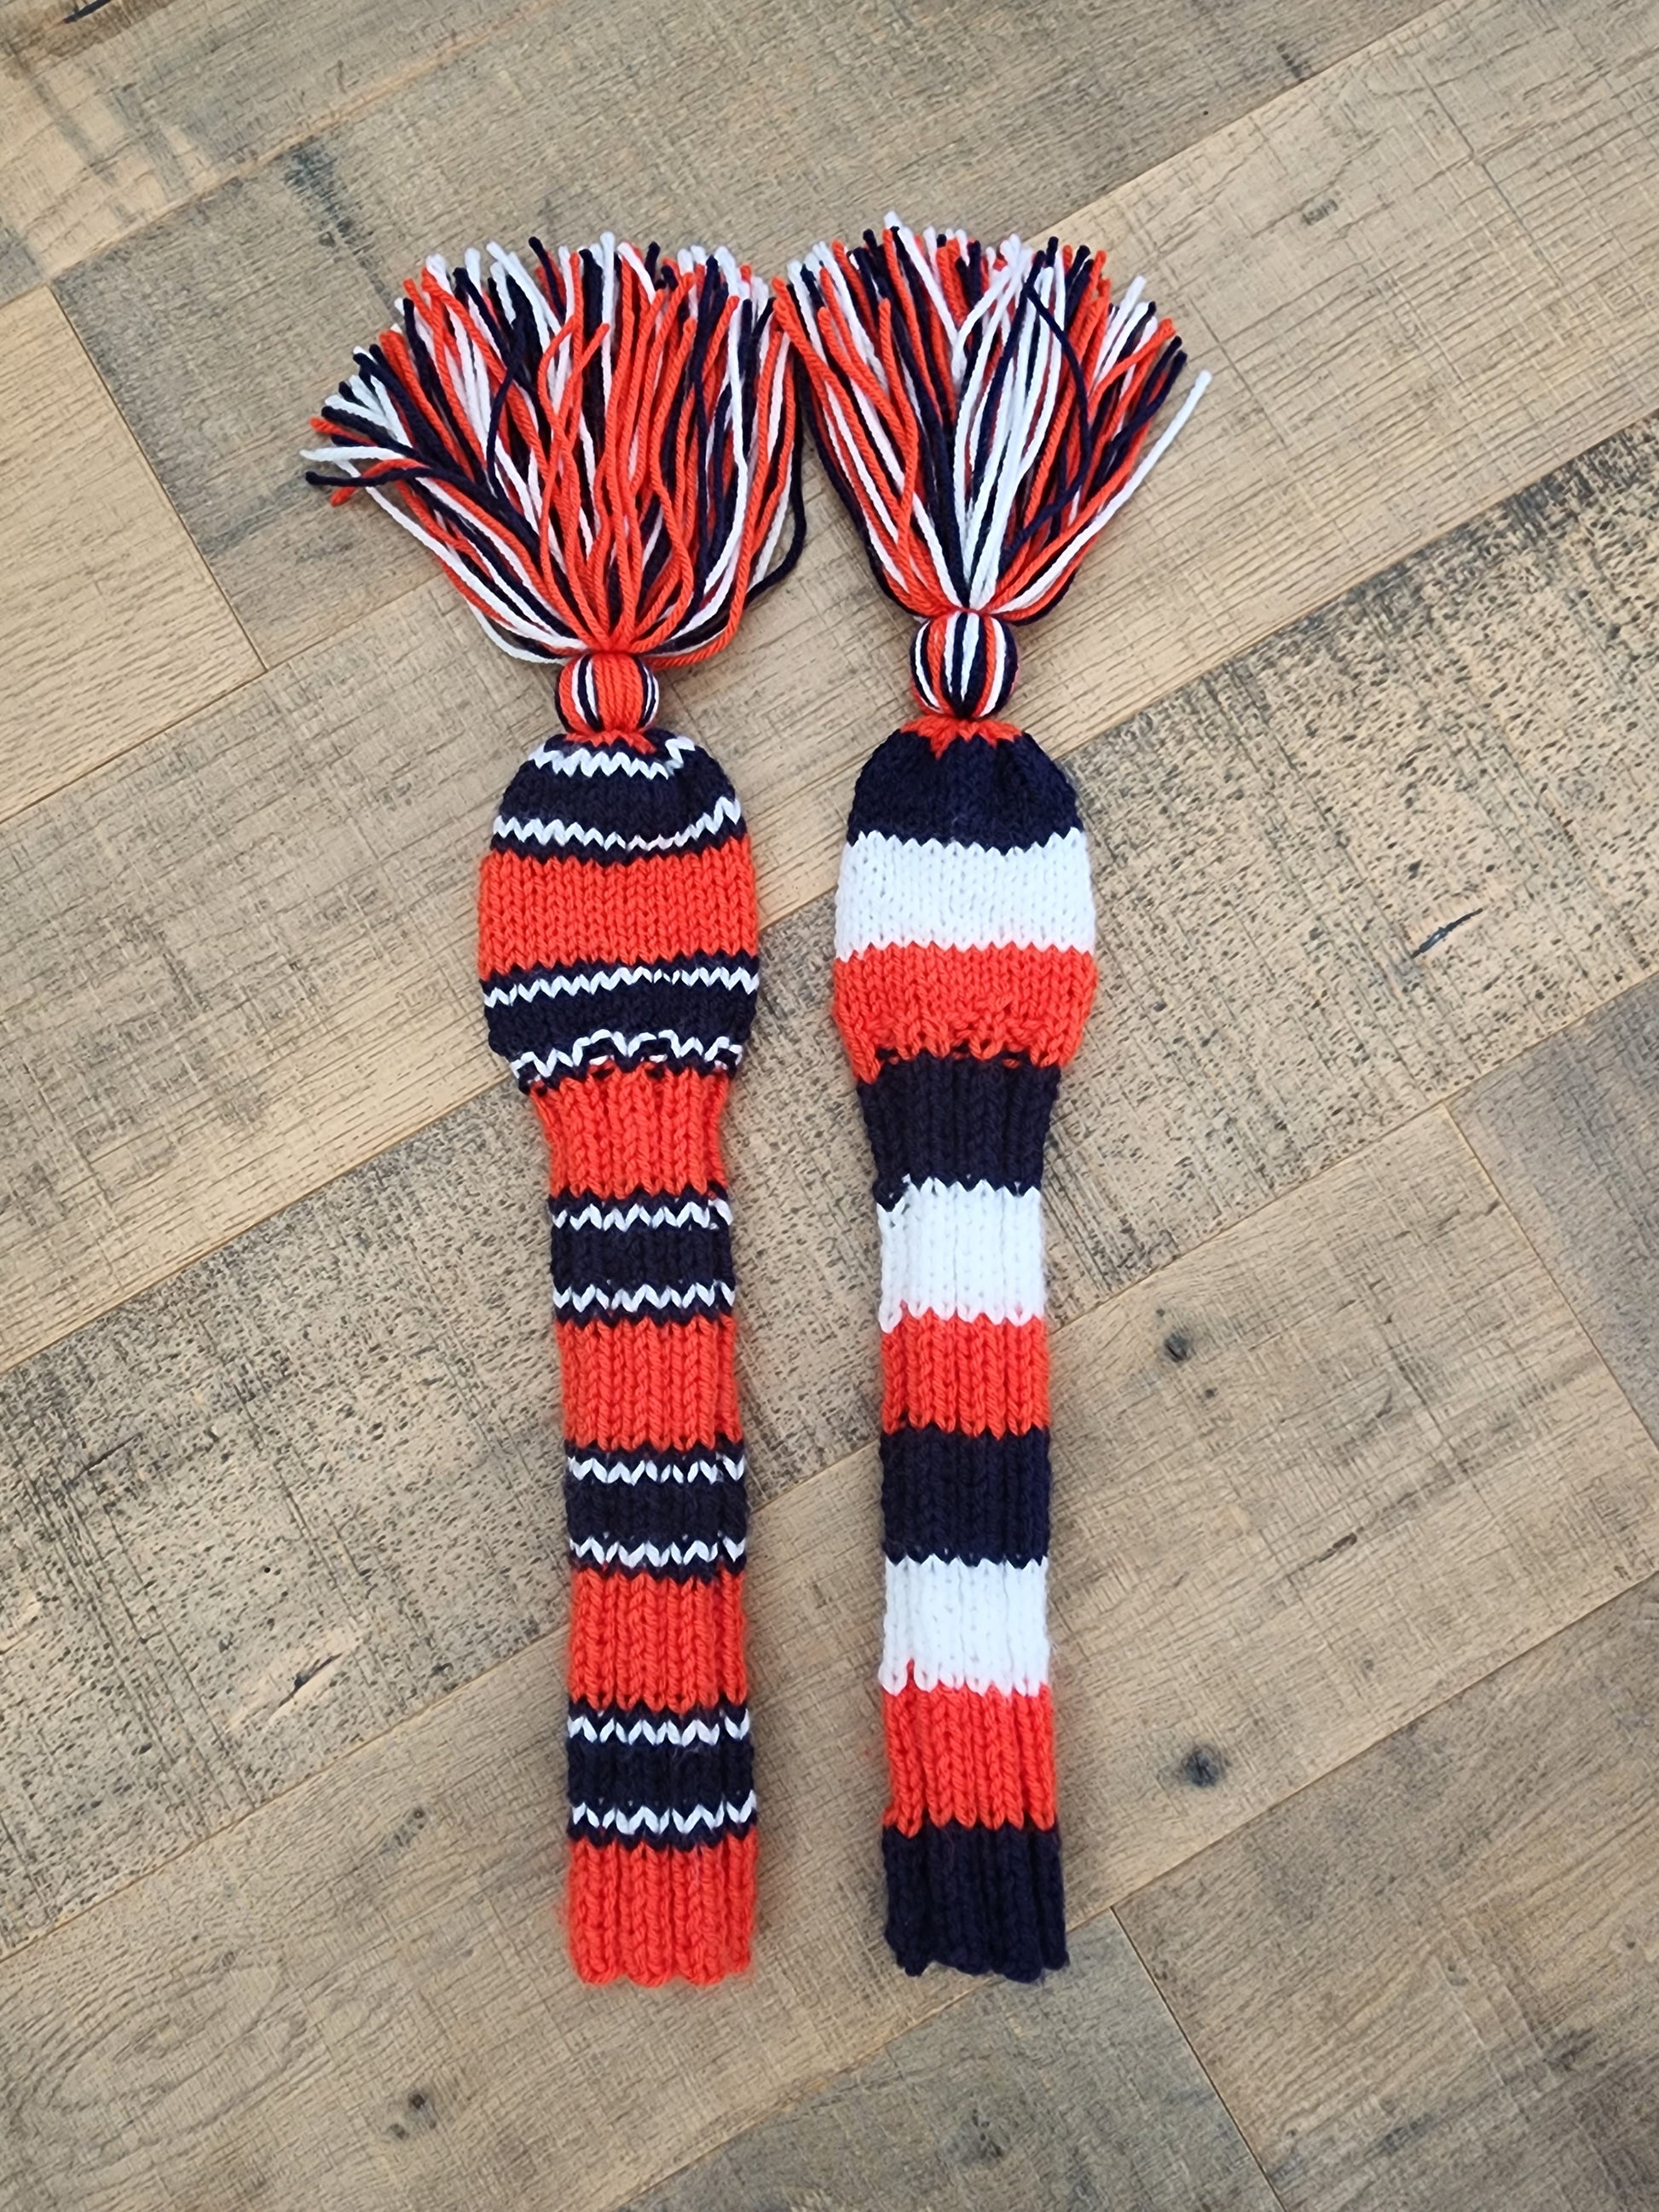 Two Golf Club Head Covers Retro-Vintage Navy, Orange & White with Tassels for Fairway Woods - Austinknittylimits